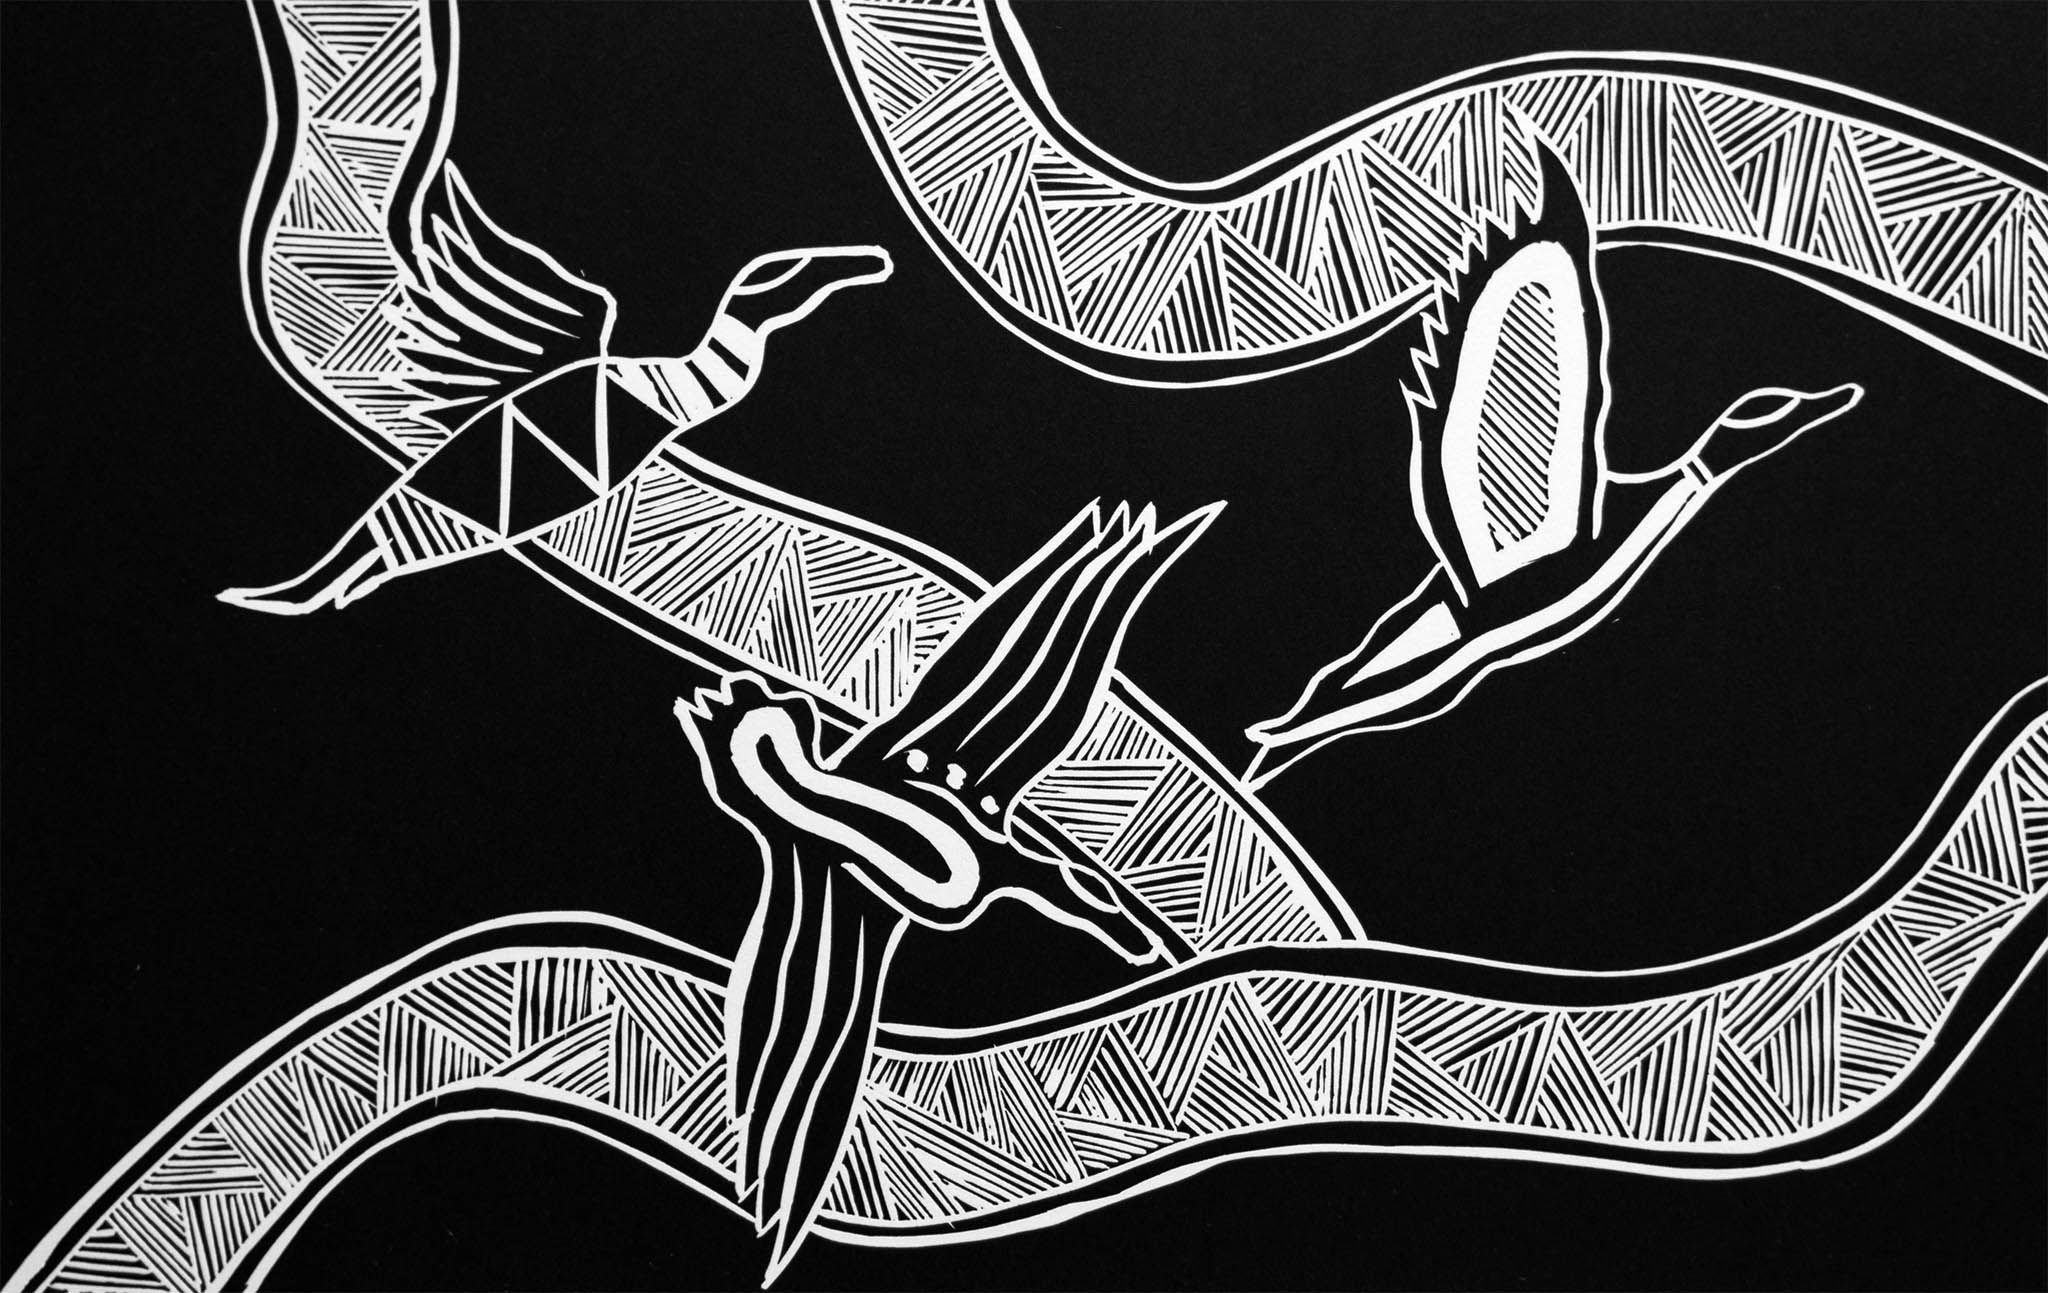 Patricia Pittman, Wood Ducks. Limited edition linocut print. Available from the Gallery Shop